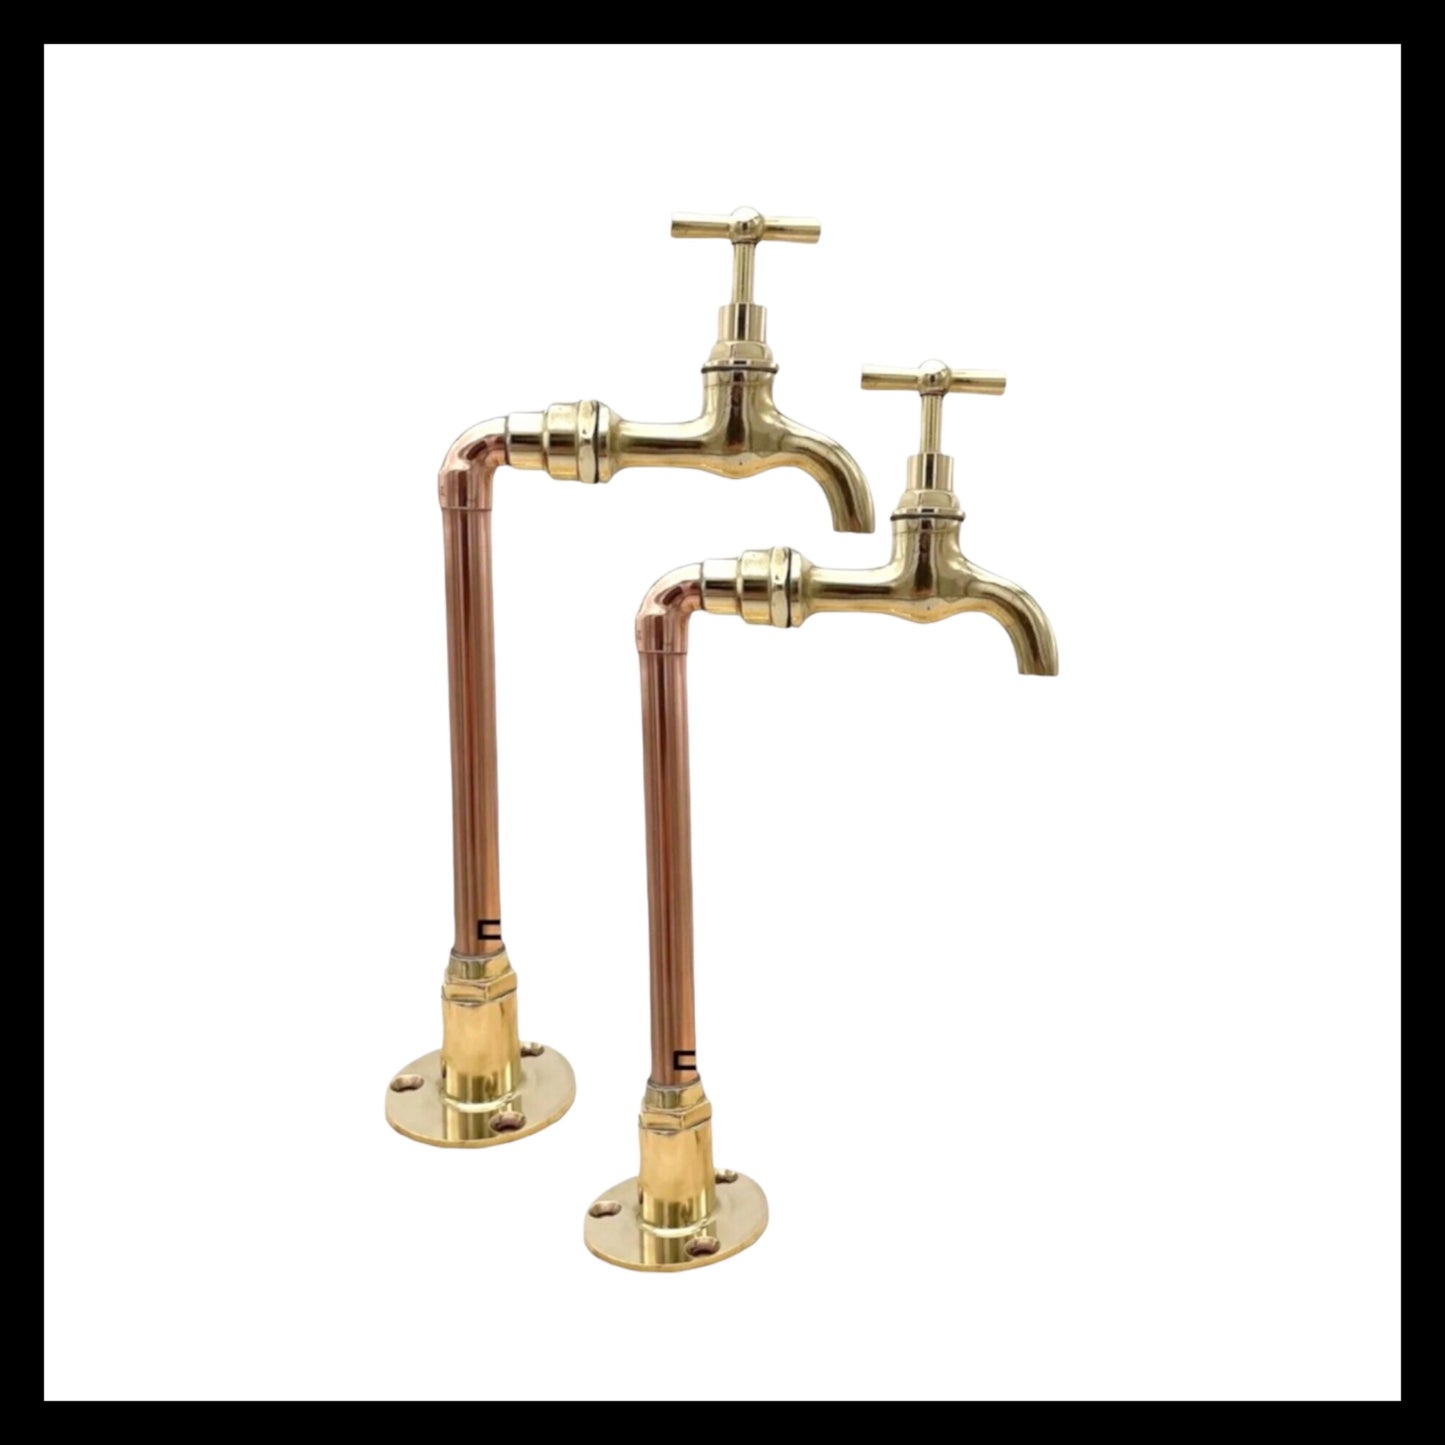 Antique Style Copper and Brass Bathroom or Kitchen Taps ideal for Belfast Sink, (T19)